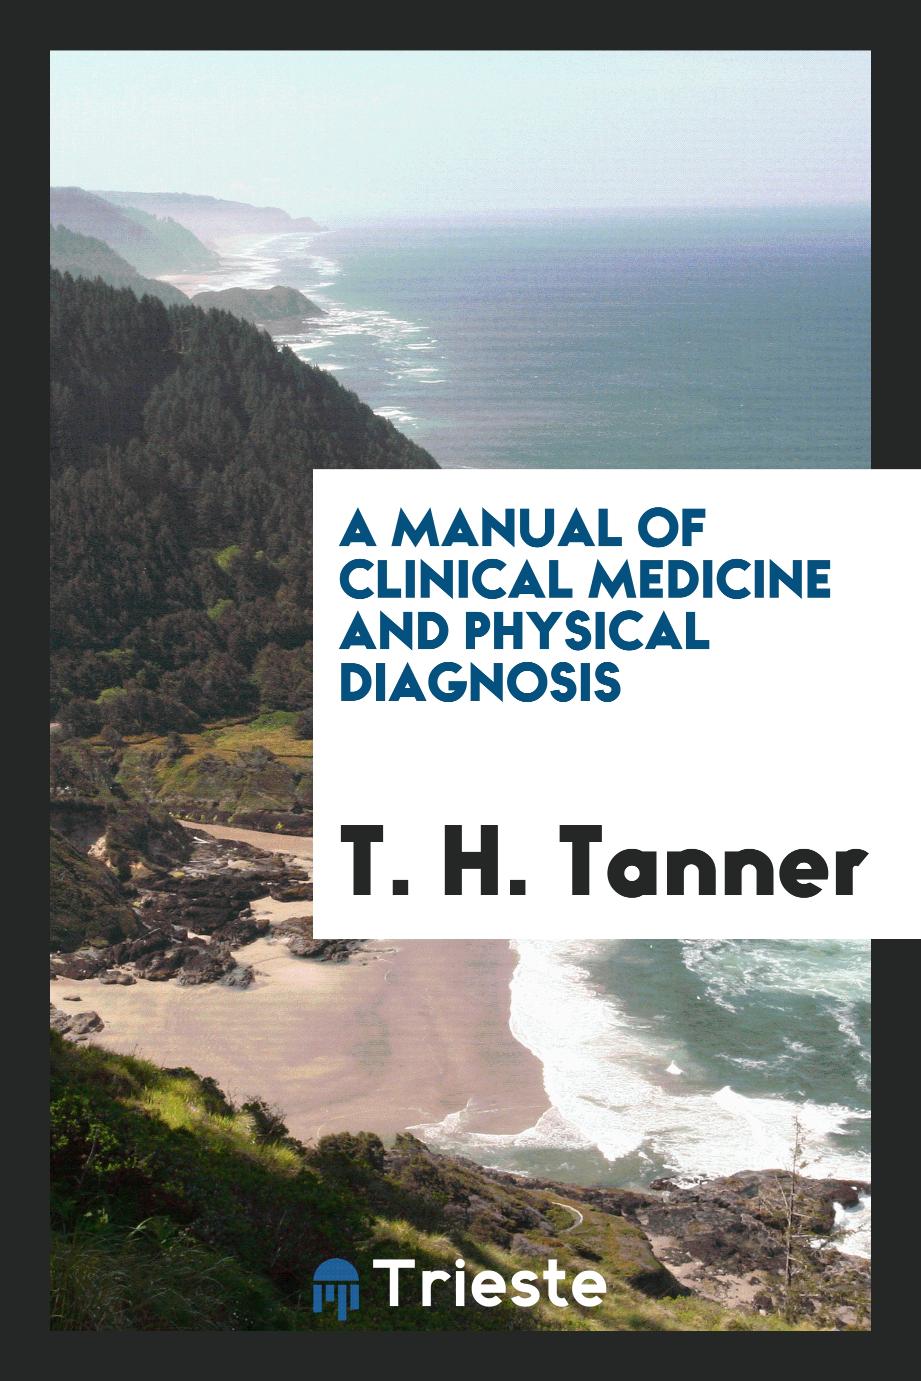 A manual of clinical medicine and physical diagnosis